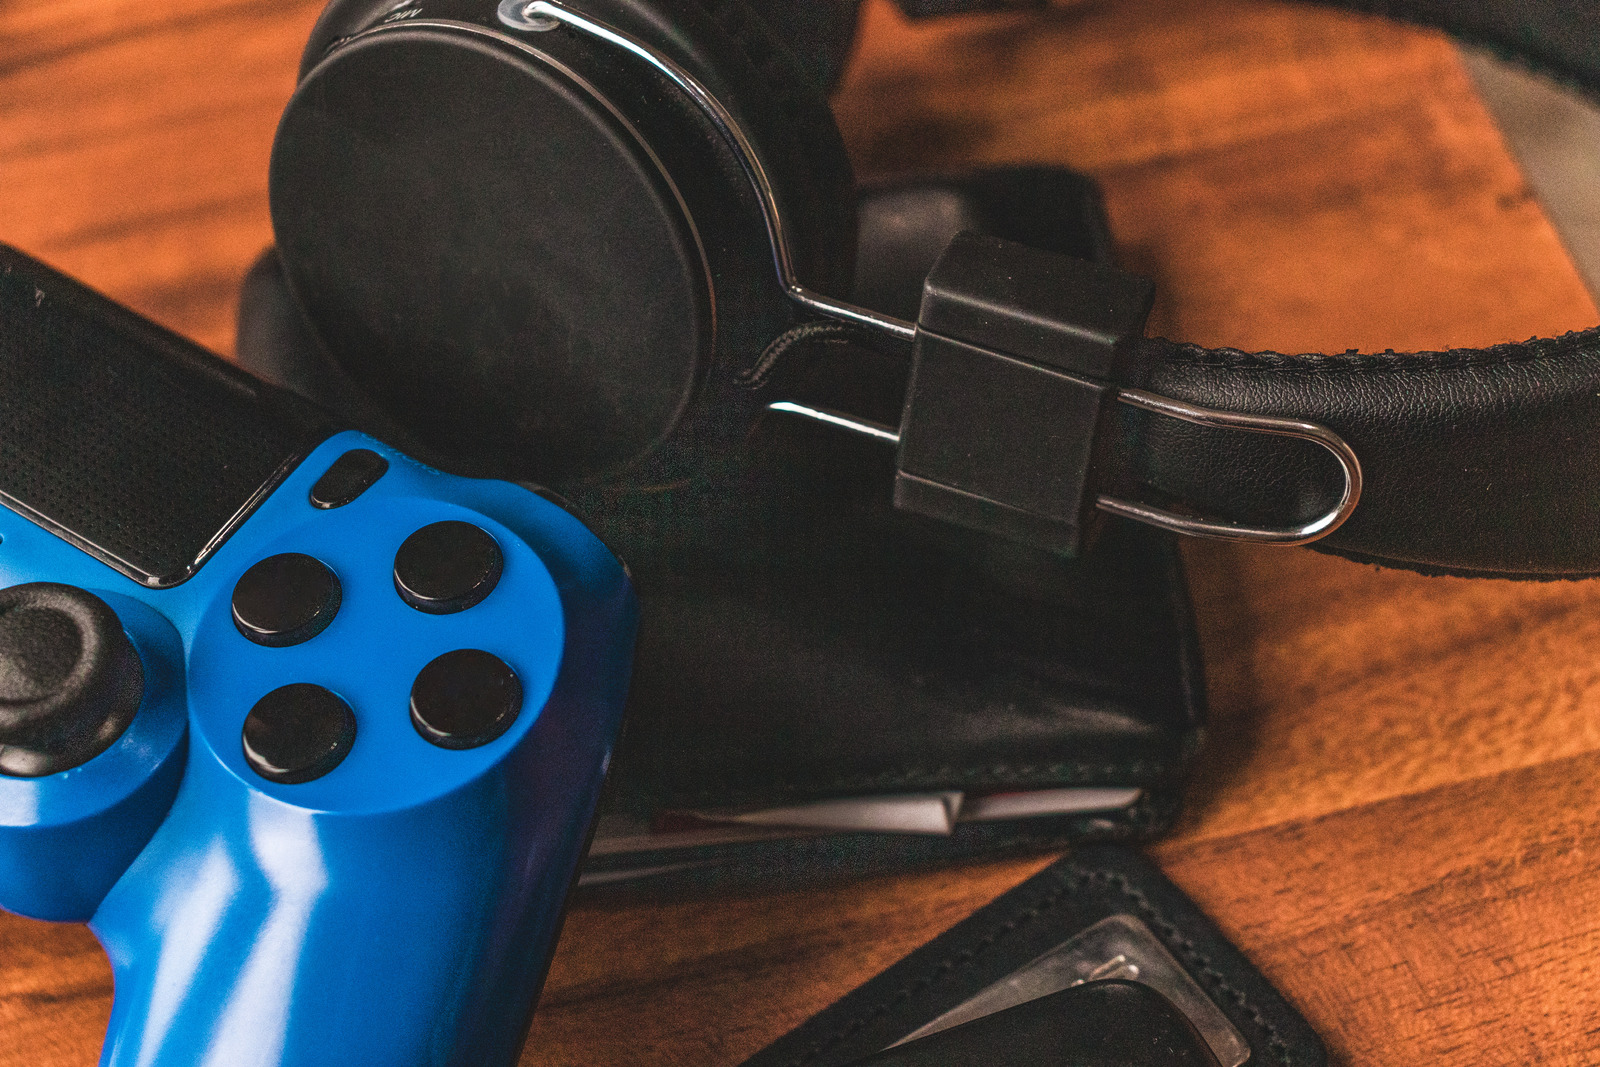 A close up shot of a blue games controller, headphones and wallet sitting on a wooden table.